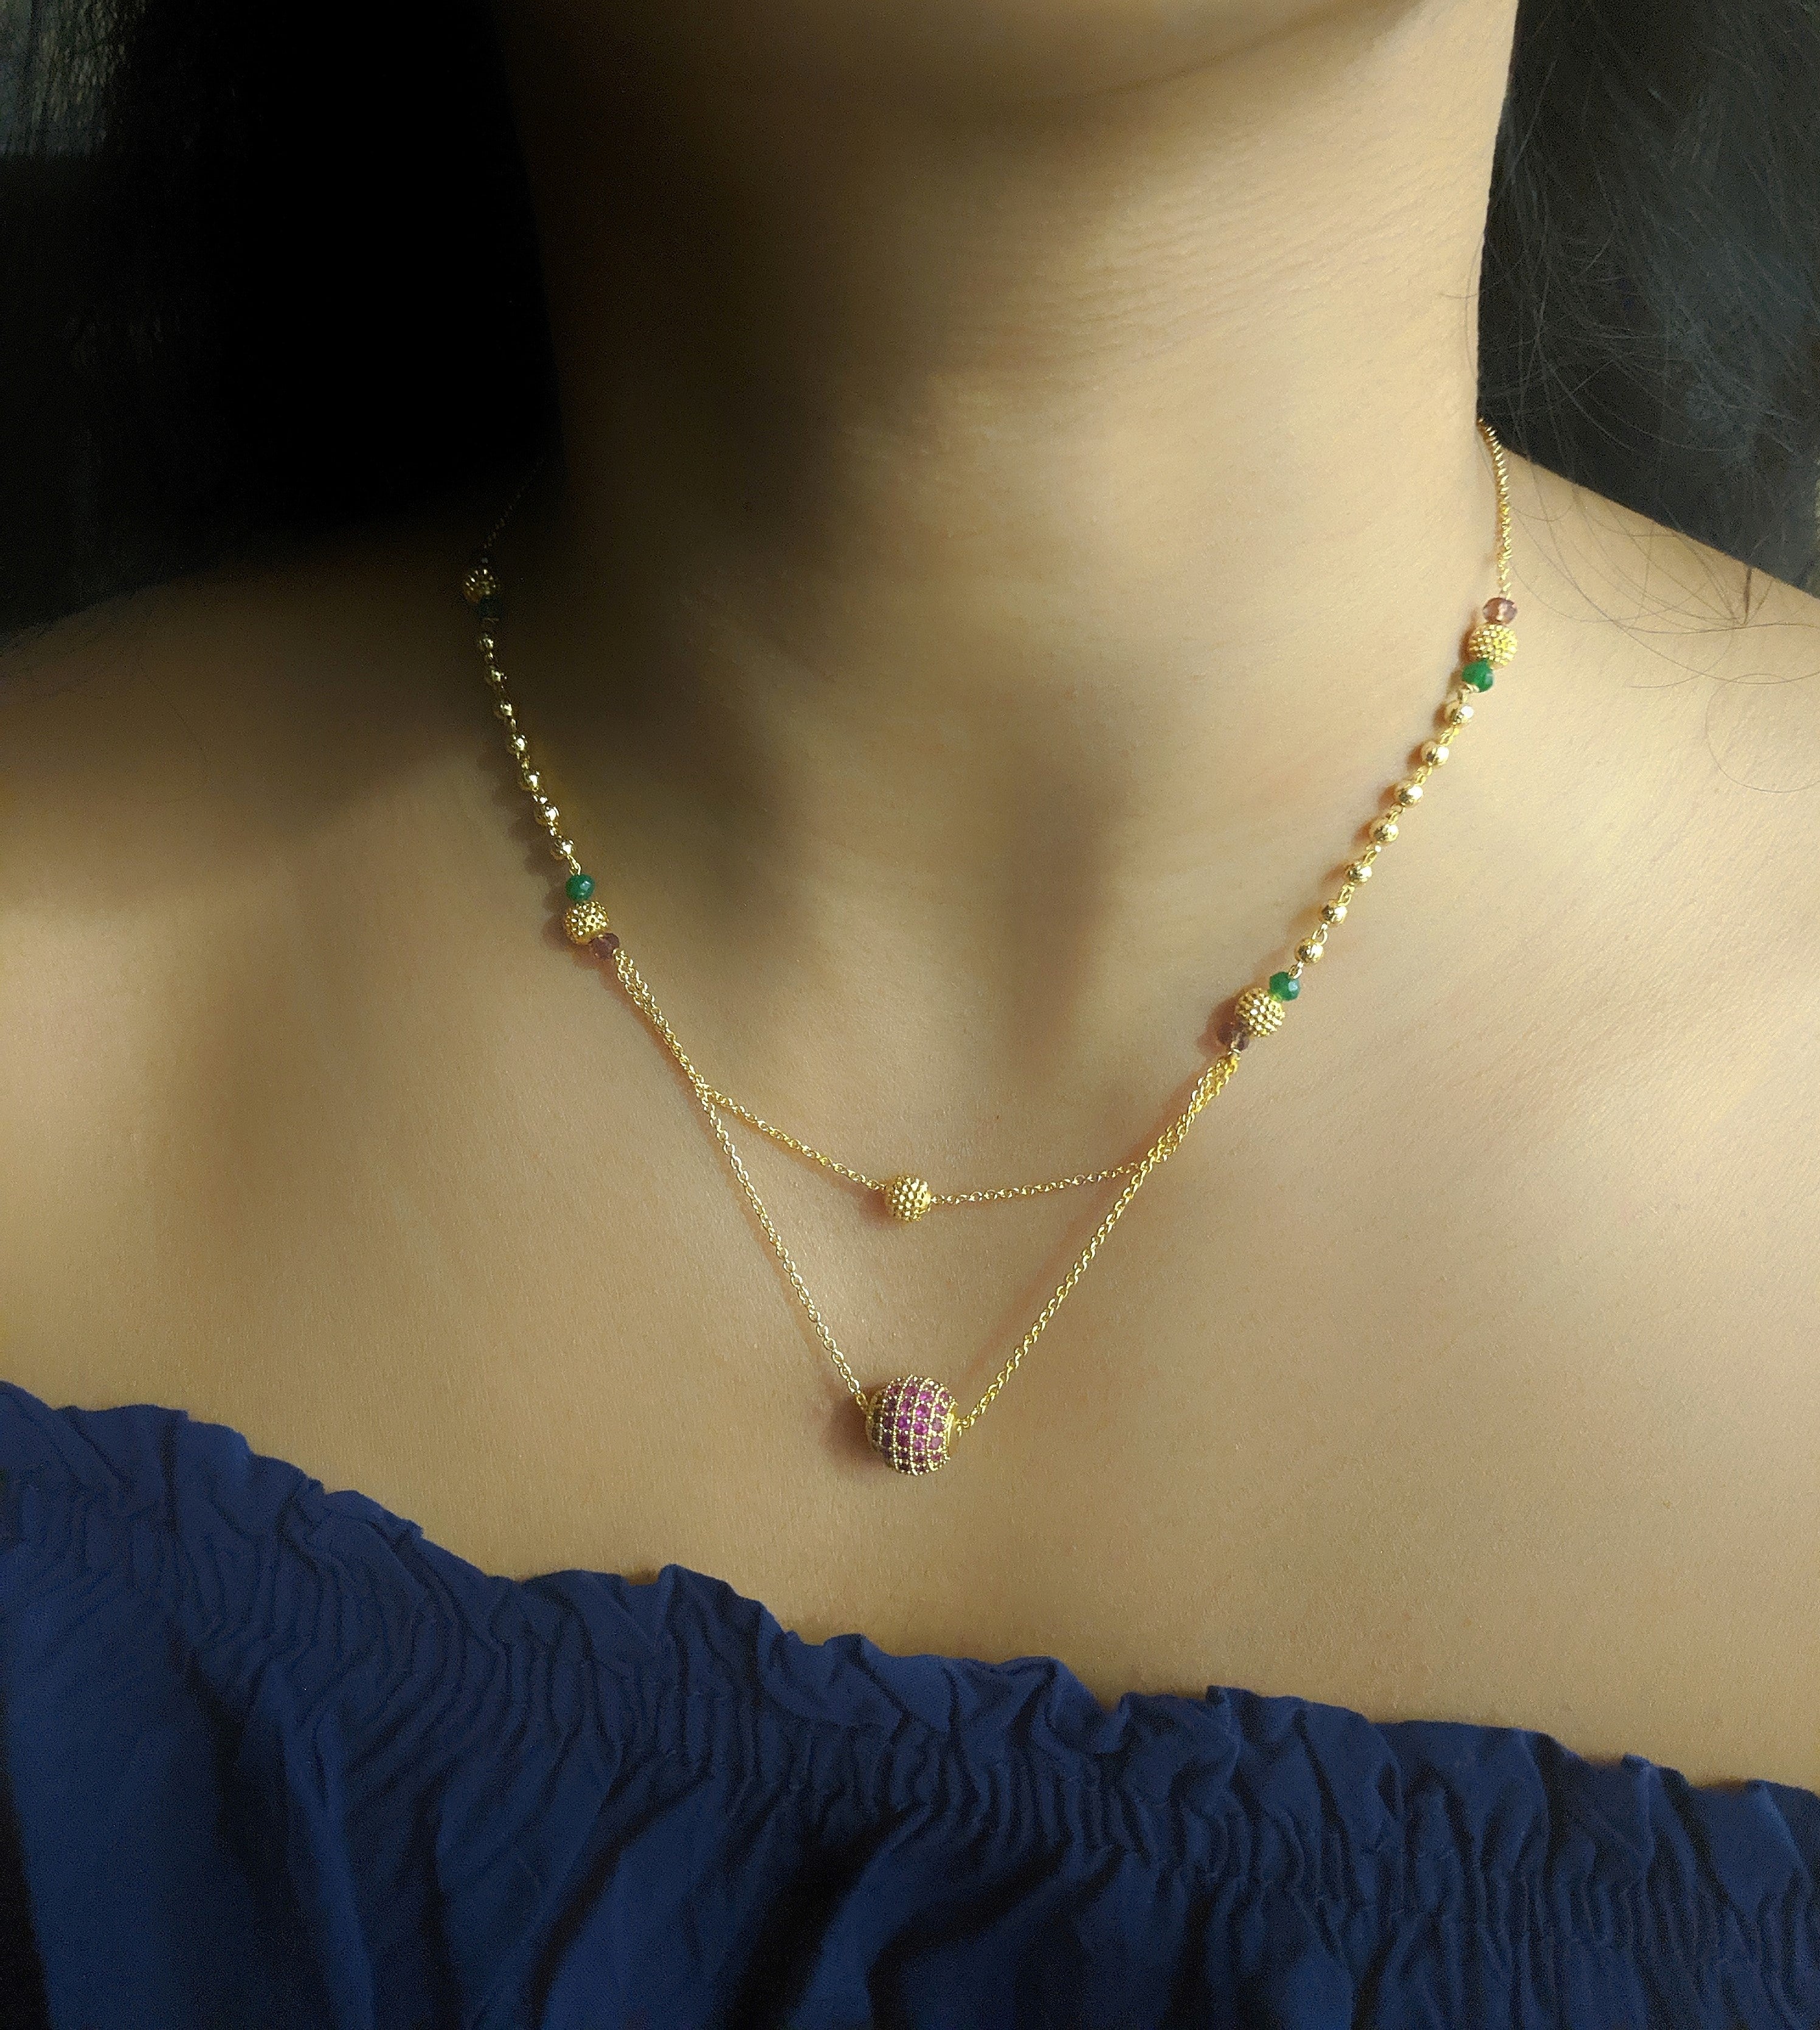 Gold Layered Chain & Pearl Necklace | Groovy's | Gold Layering Necklace